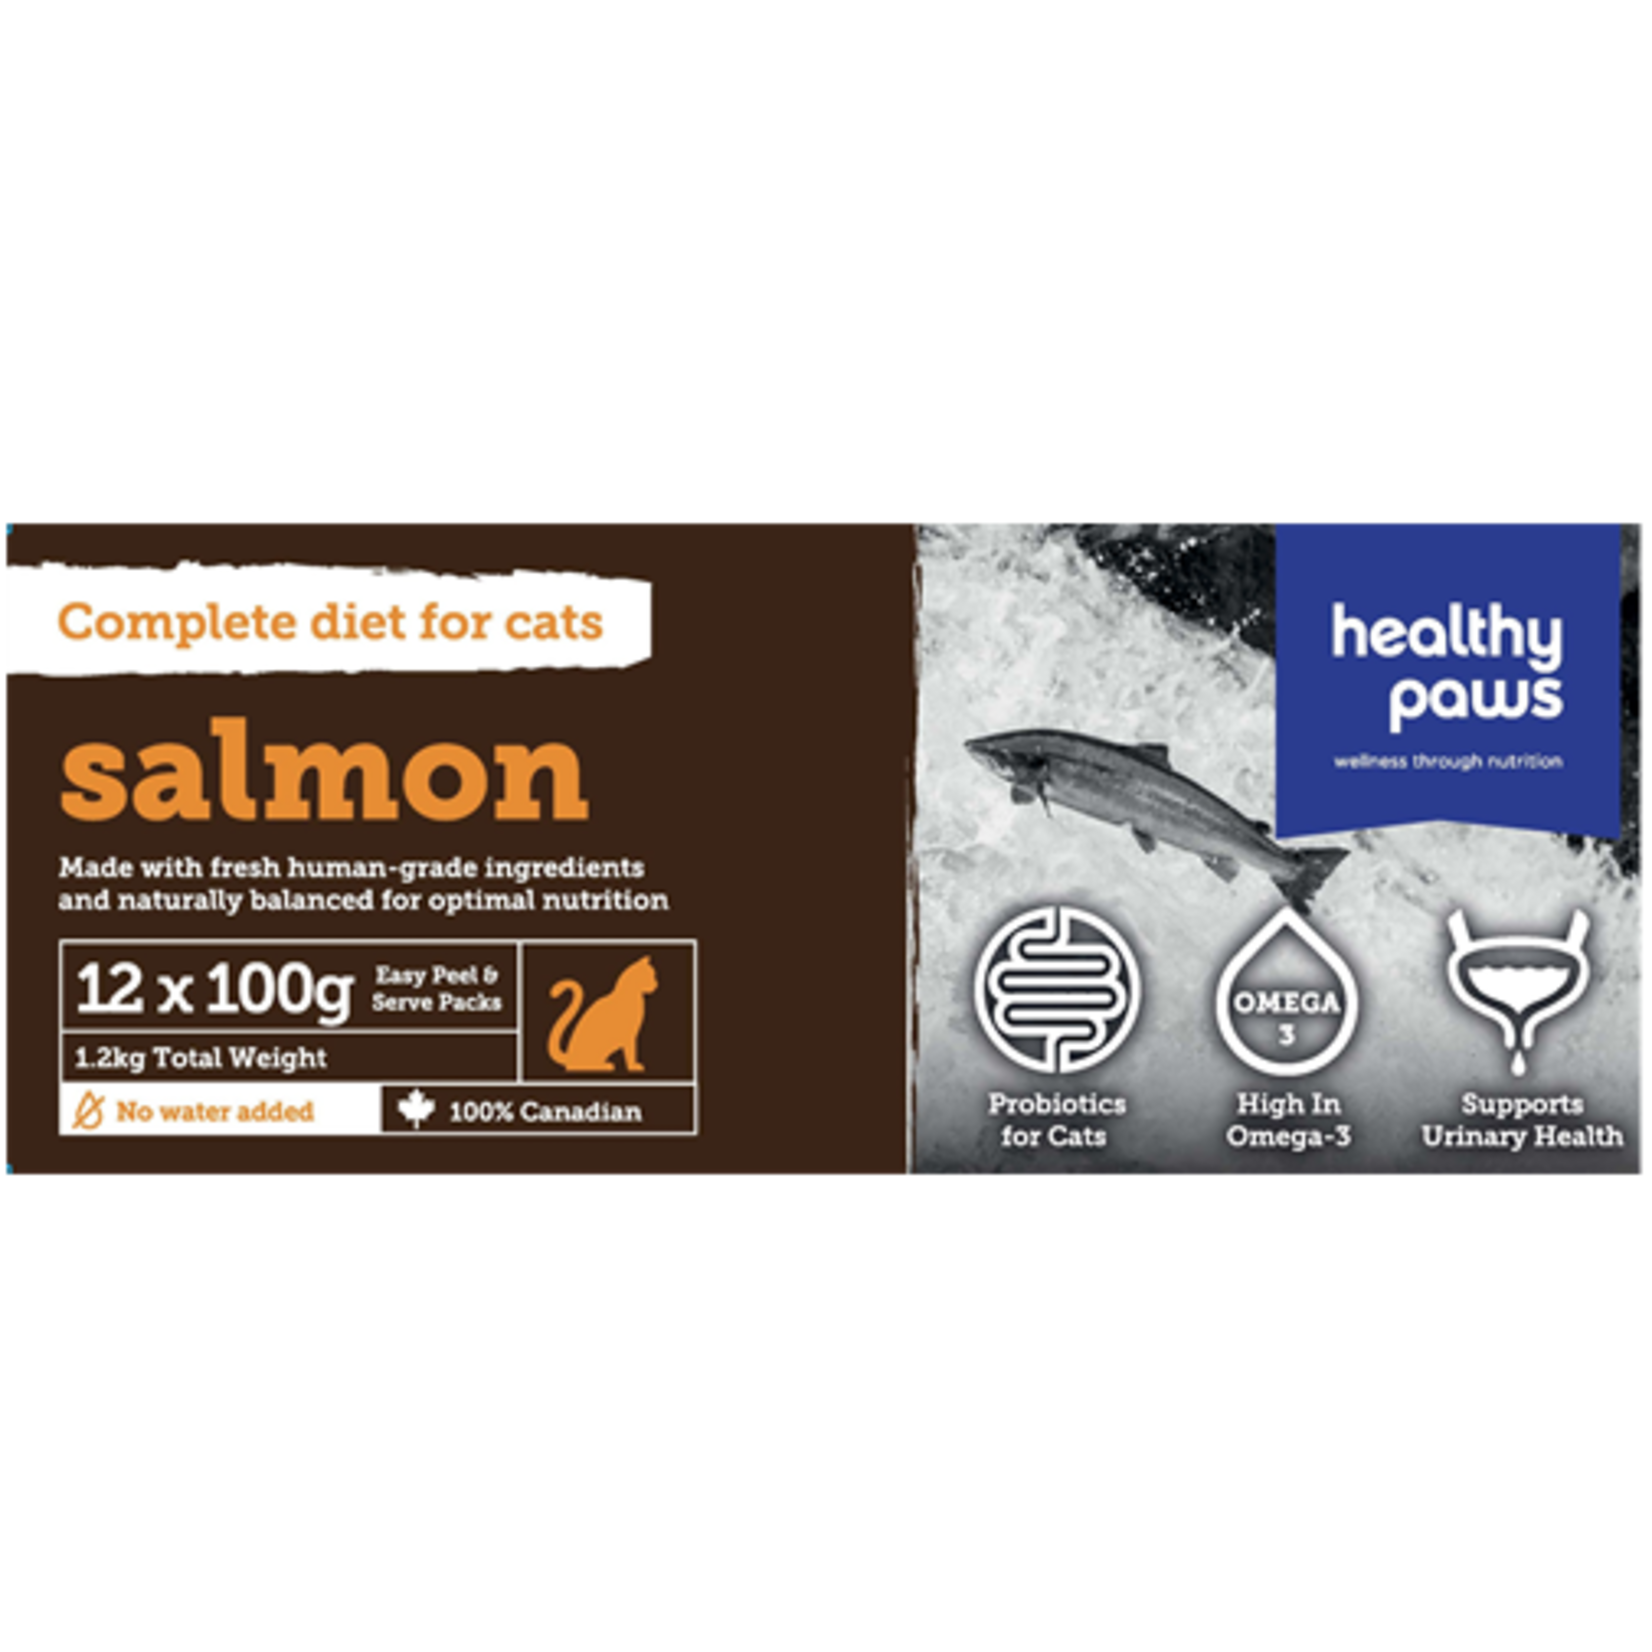 HEALTY PAWS Healthy Paws Complete Cat Dinner Salmon 12 x 100g